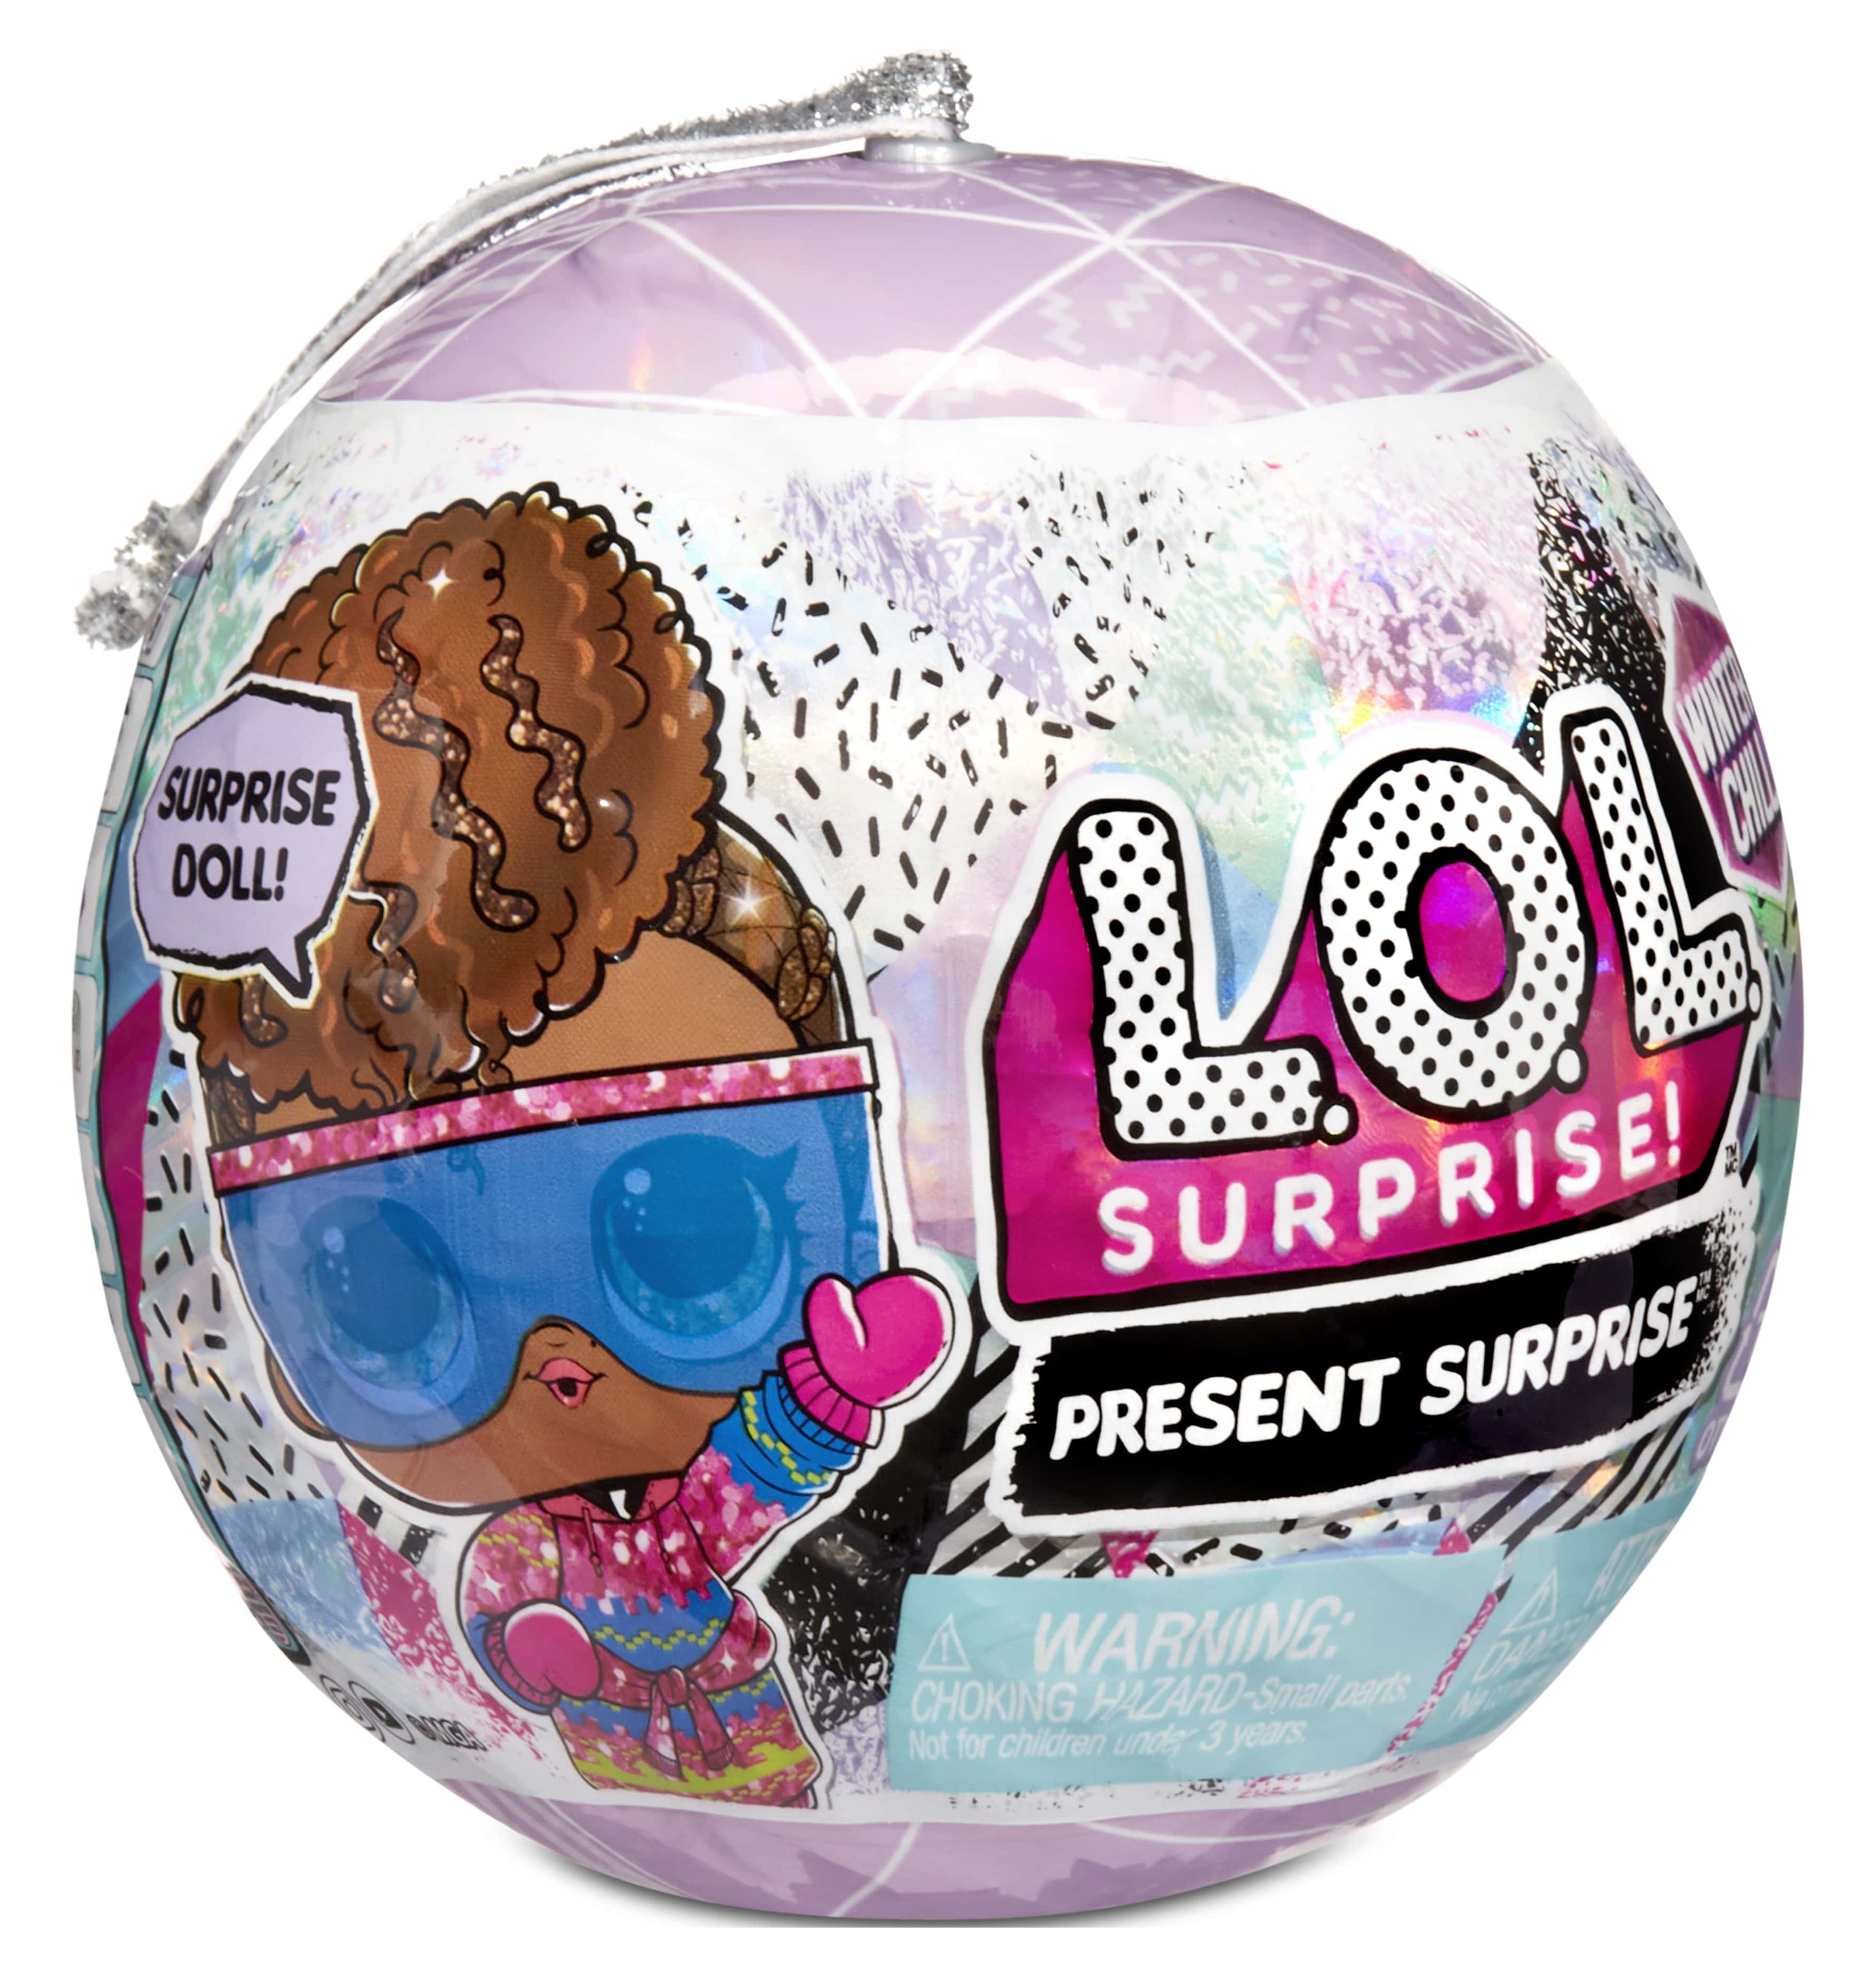 LOL Surprise Winter Chill Dolls With 8 Surprises Including Collectible Doll, Fashions, Doll Accessories, Holiday Ornament Reusable Packaging – Great Gift for Girls Ages 4+ - image 3 of 10